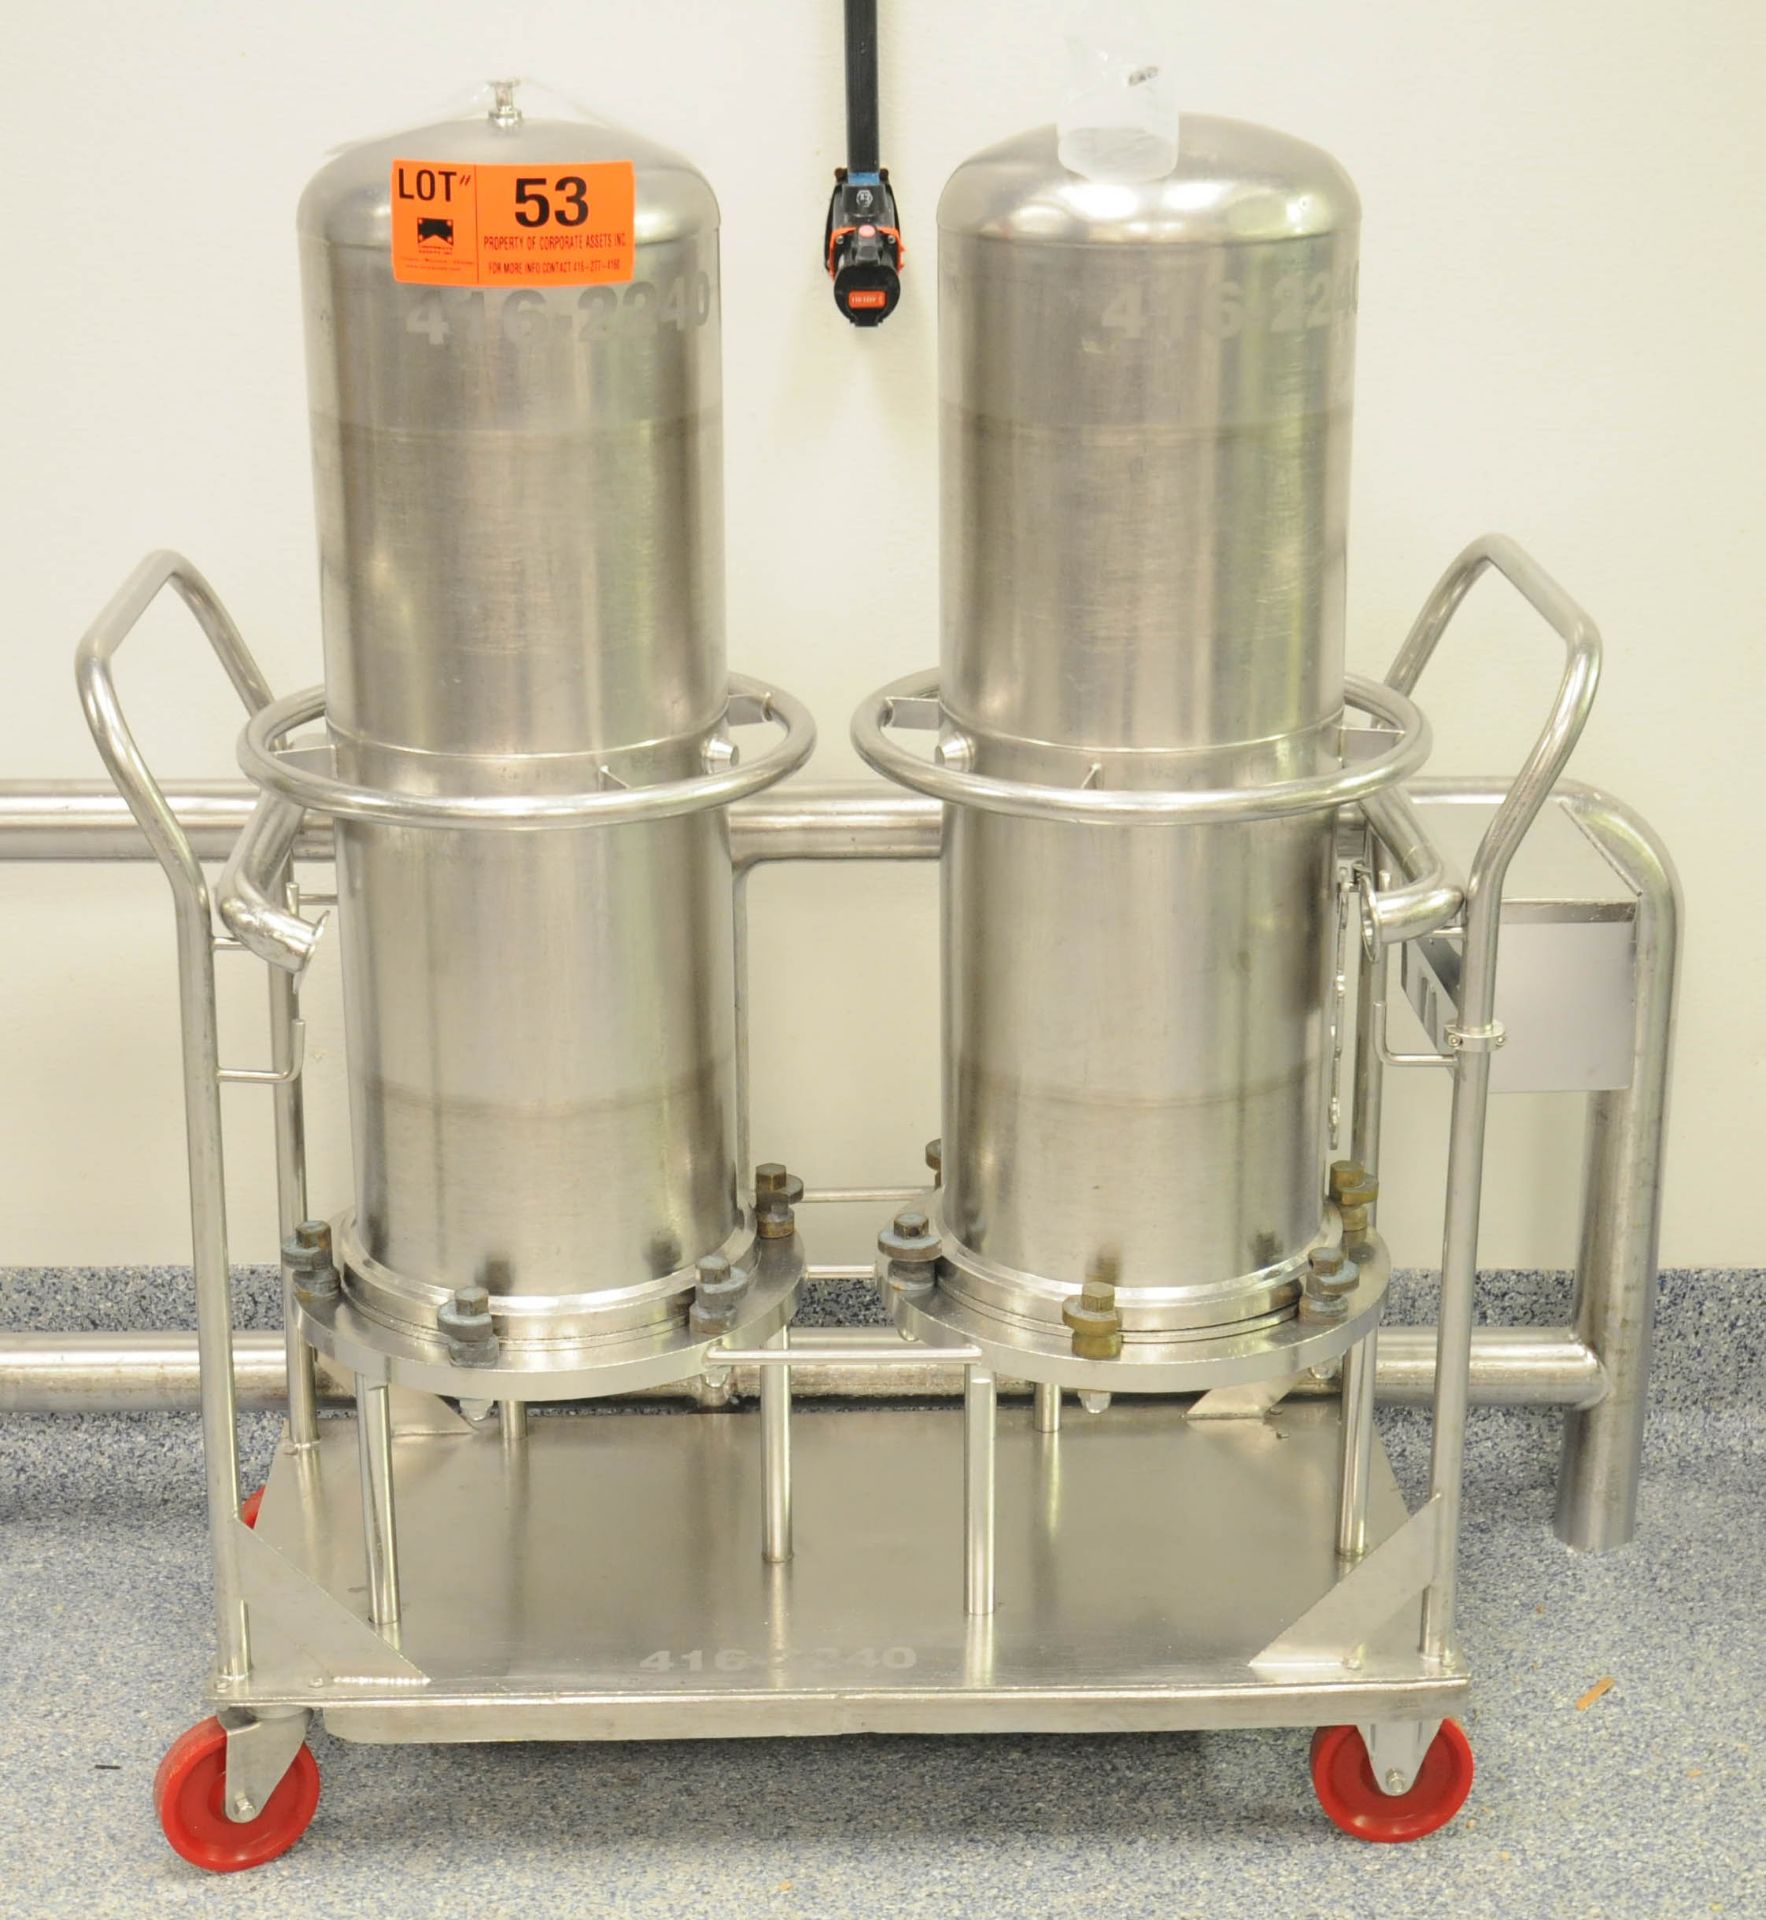 CUNO STAINLESS STEEL PORTABLE FILTRATION UNITS S/N N/A (416.2240) (RM 361) [REMOVAL FEE LOT 53 - $